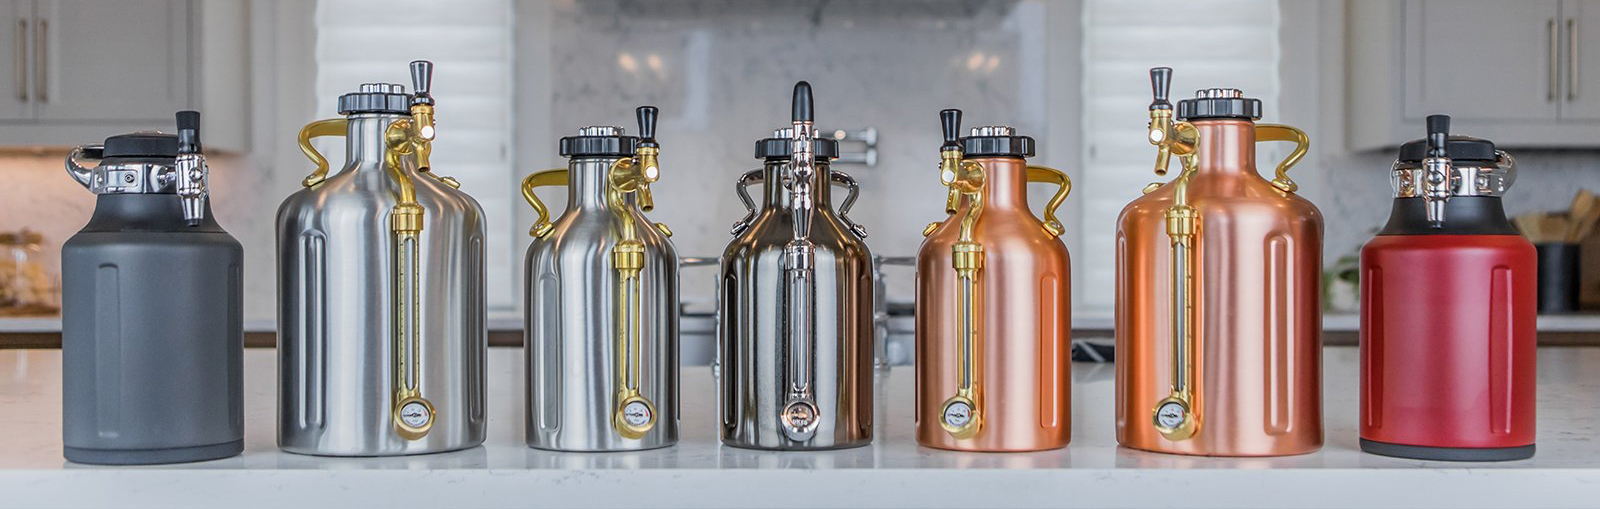 GrowlerWerks product line-up